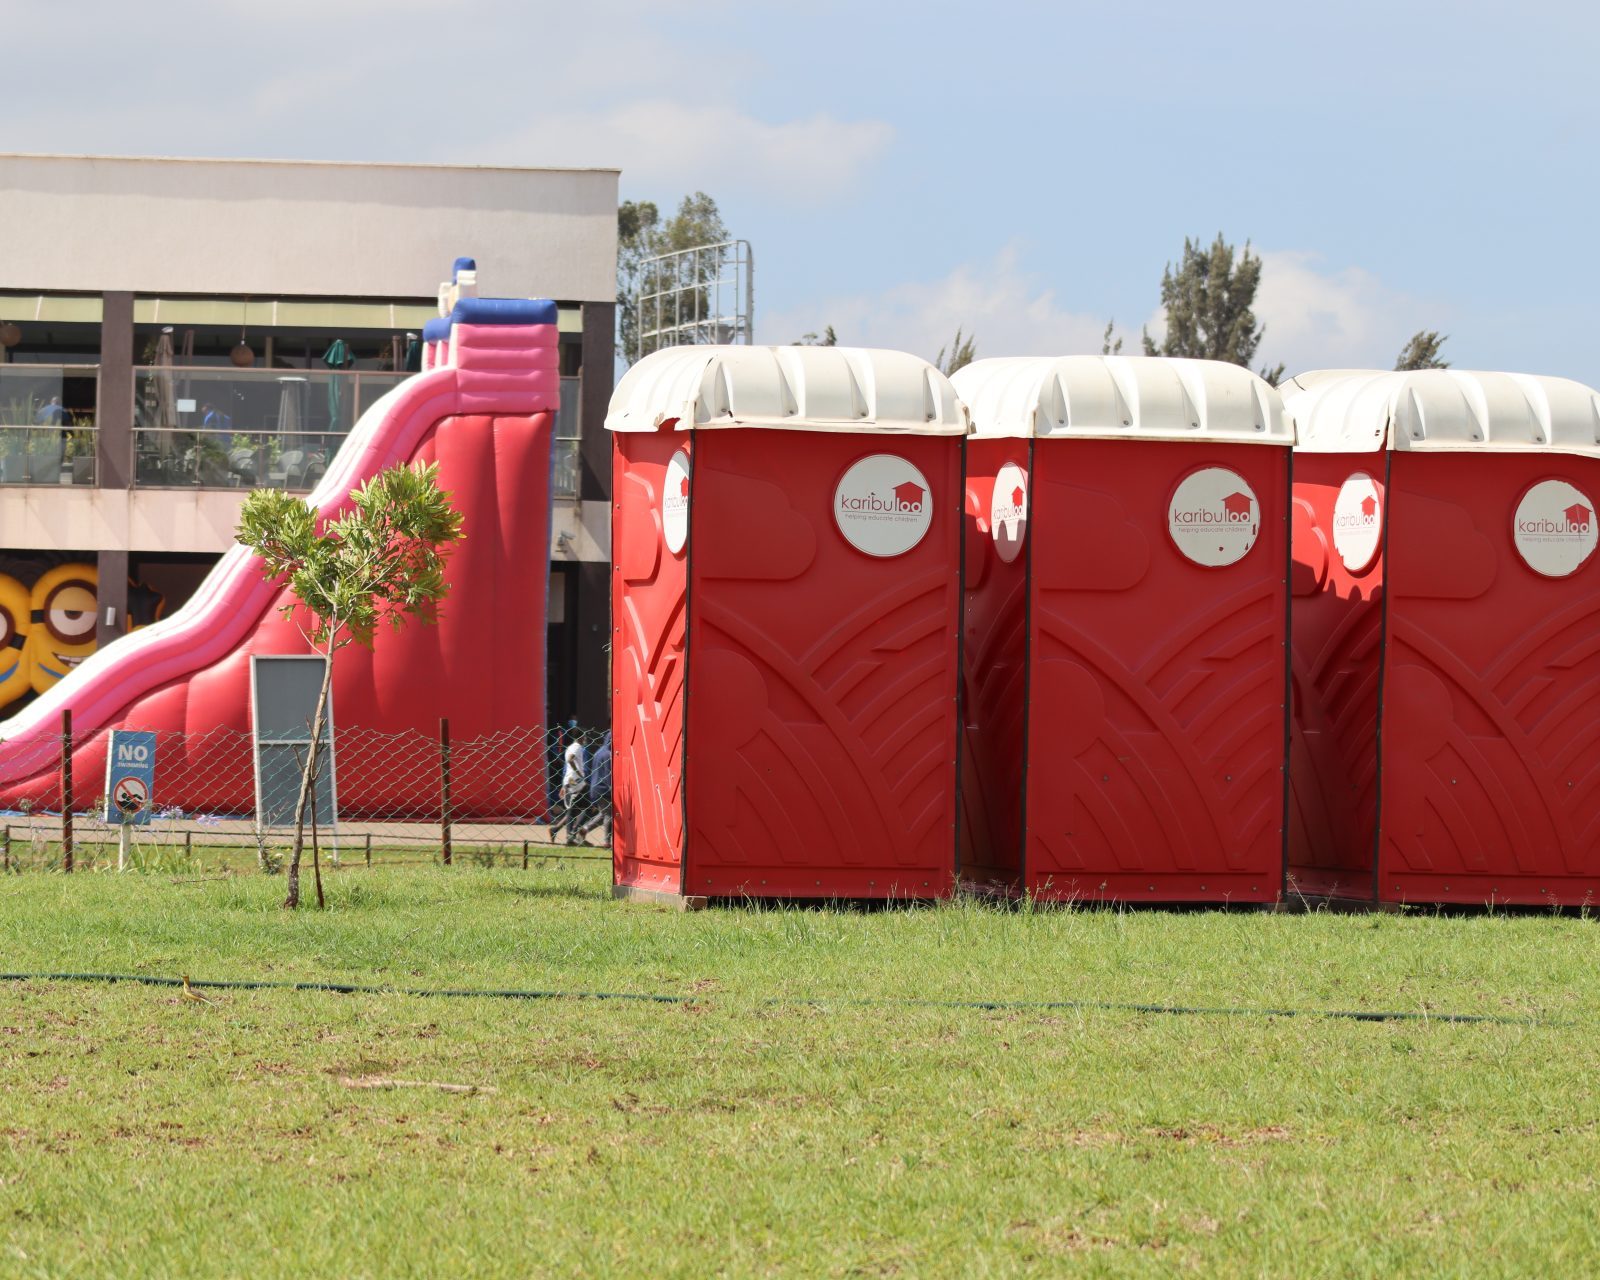 Portable Toilet Safety: What Every Parent Needs to Know